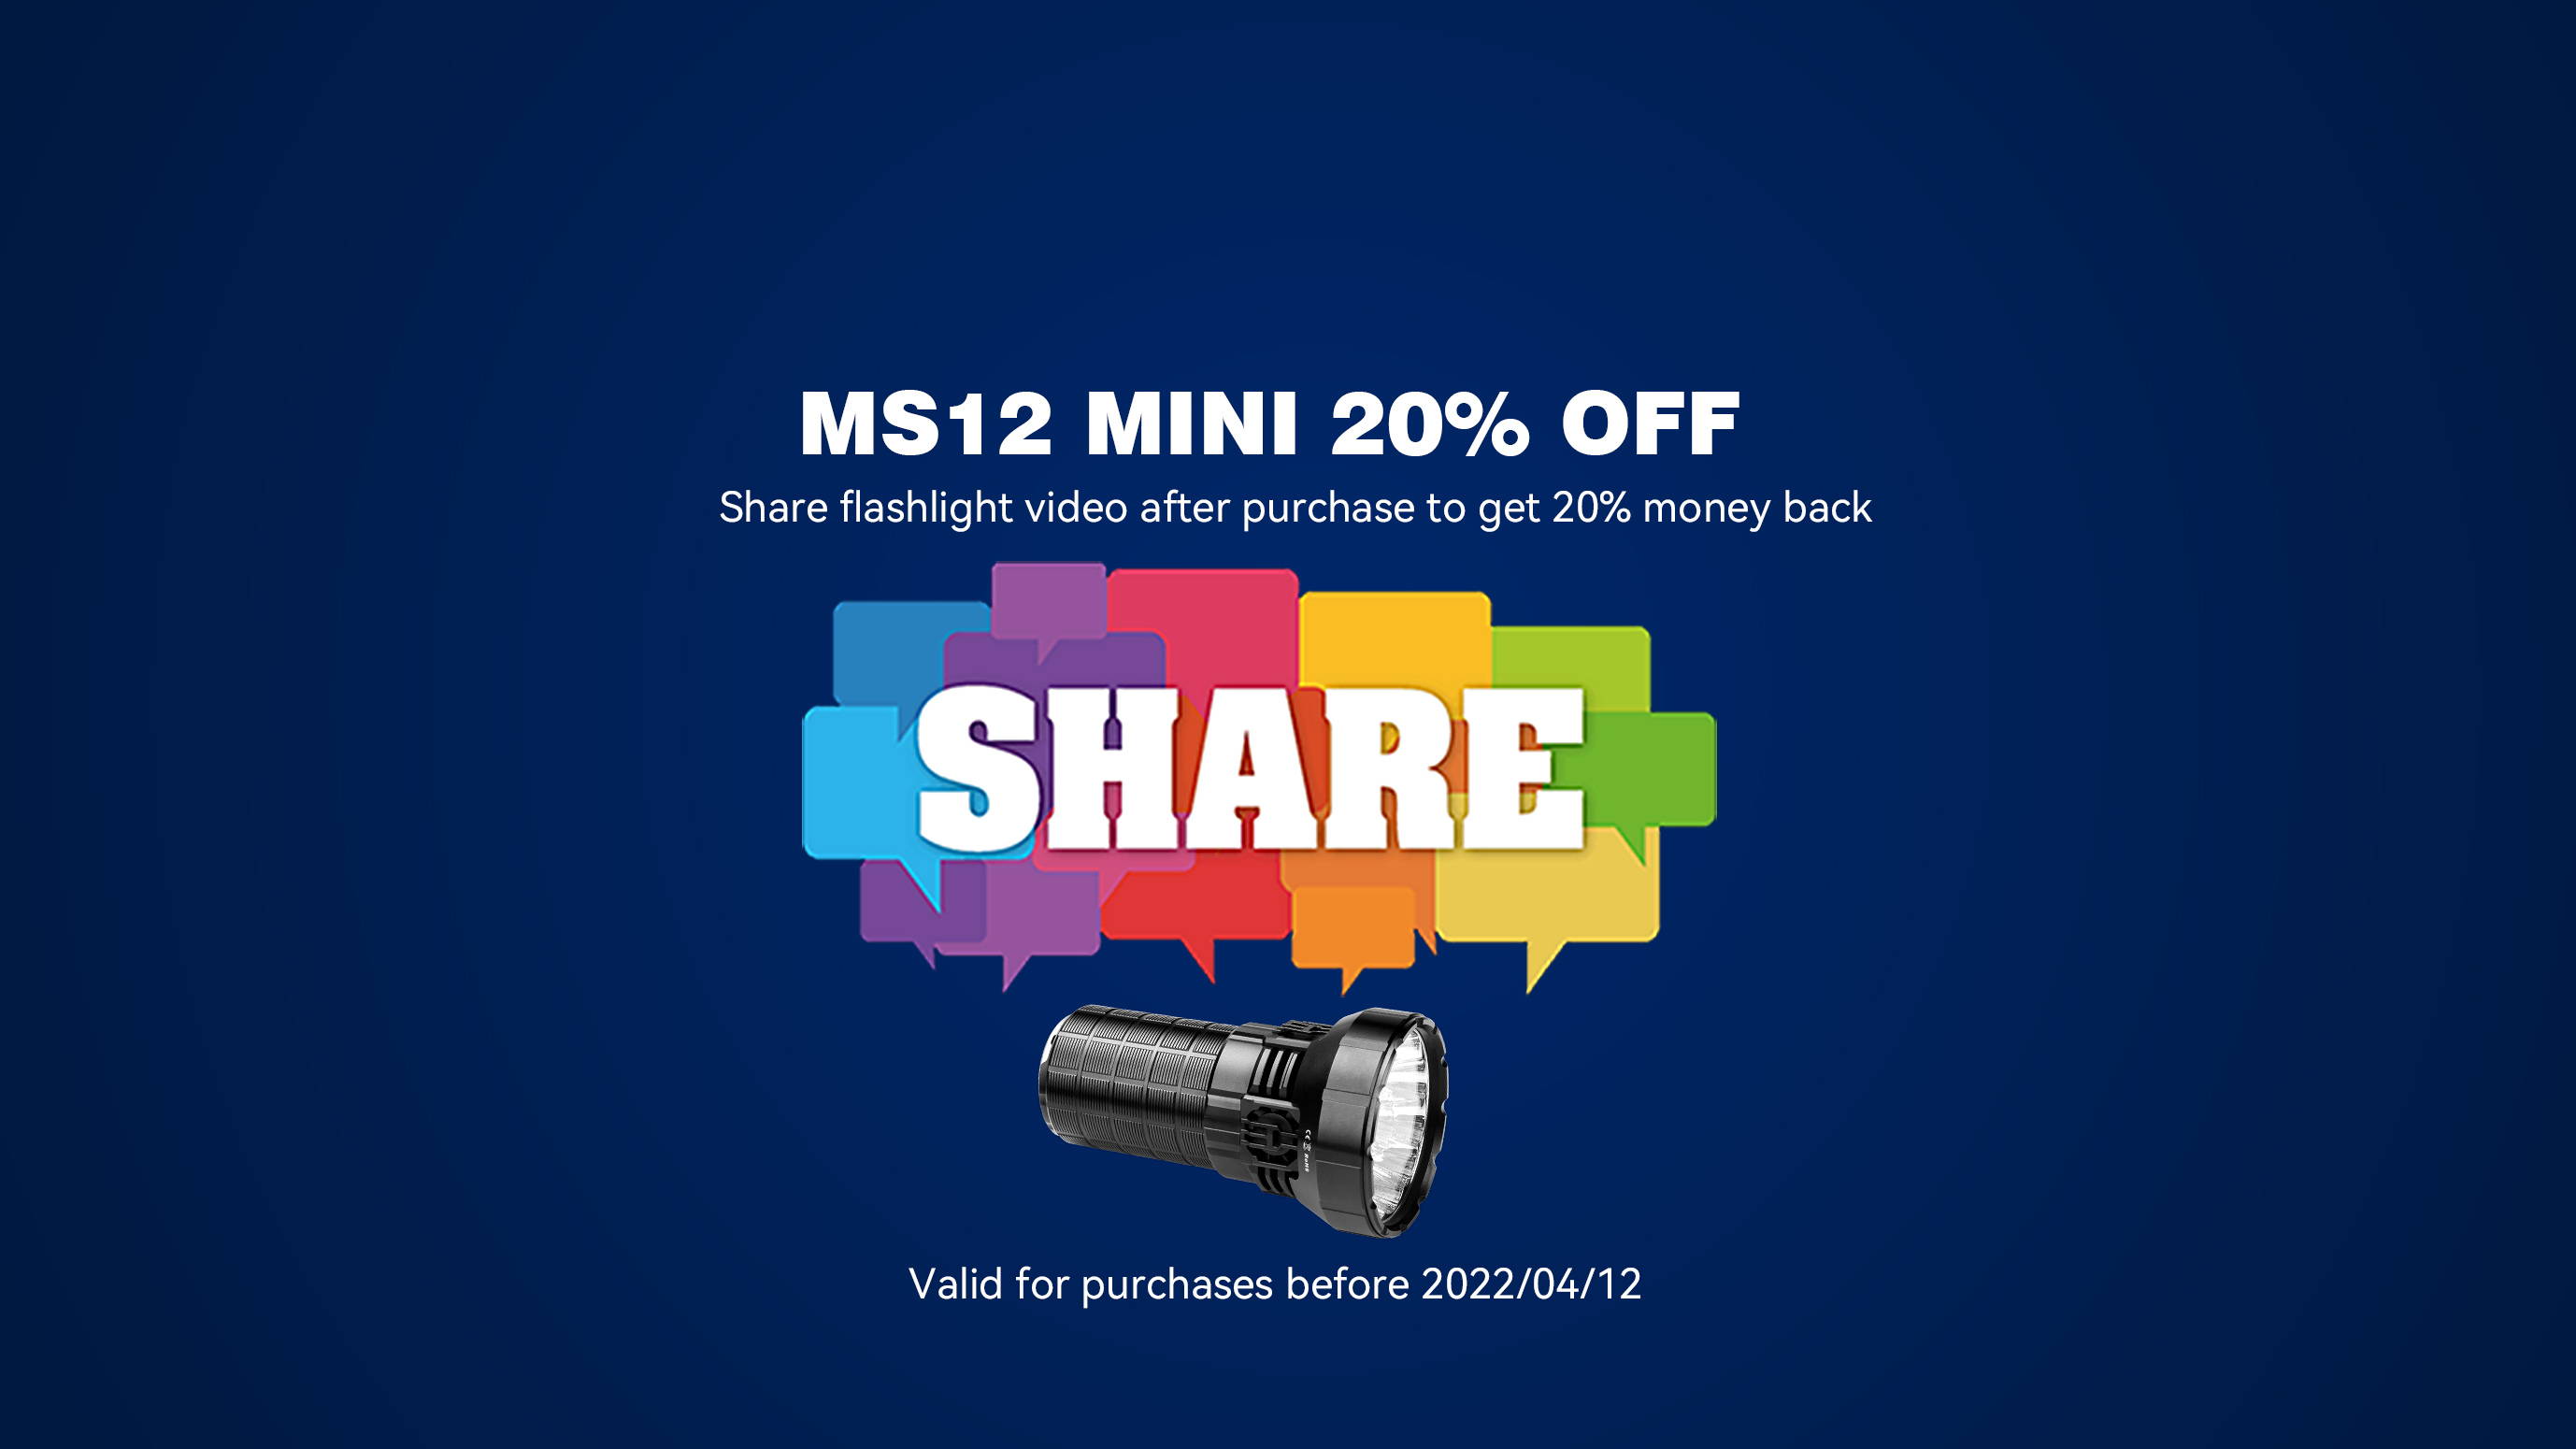 Share MS12 MINI and get 20% money back